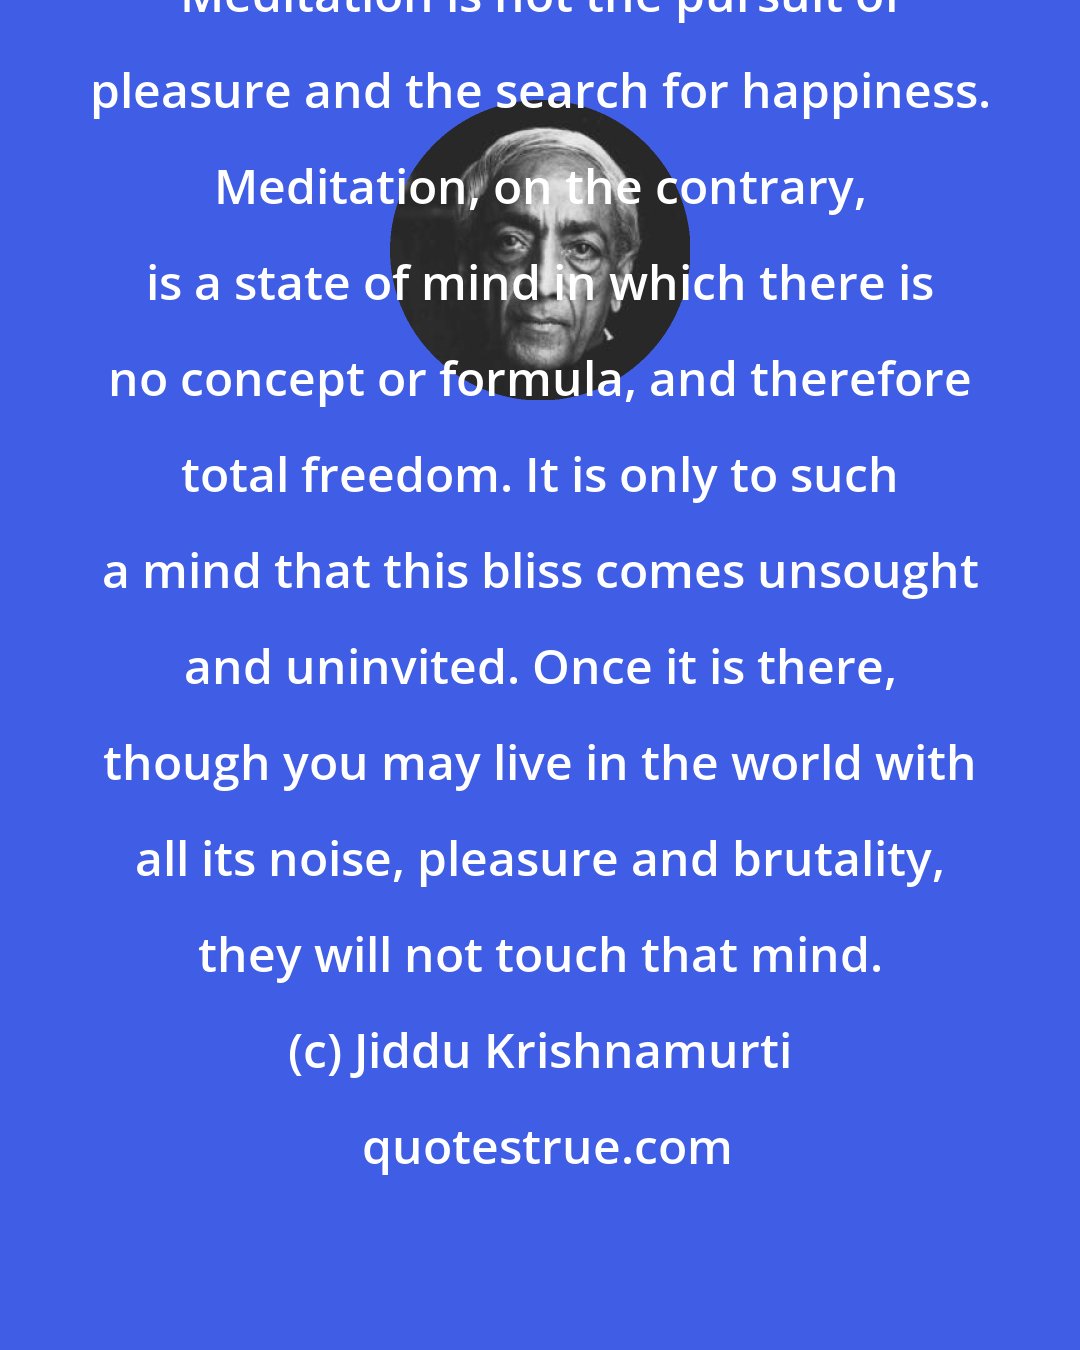 Jiddu Krishnamurti: Meditation is not the pursuit of pleasure and the search for happiness. Meditation, on the contrary, is a state of mind in which there is no concept or formula, and therefore total freedom. It is only to such a mind that this bliss comes unsought and uninvited. Once it is there, though you may live in the world with all its noise, pleasure and brutality, they will not touch that mind.